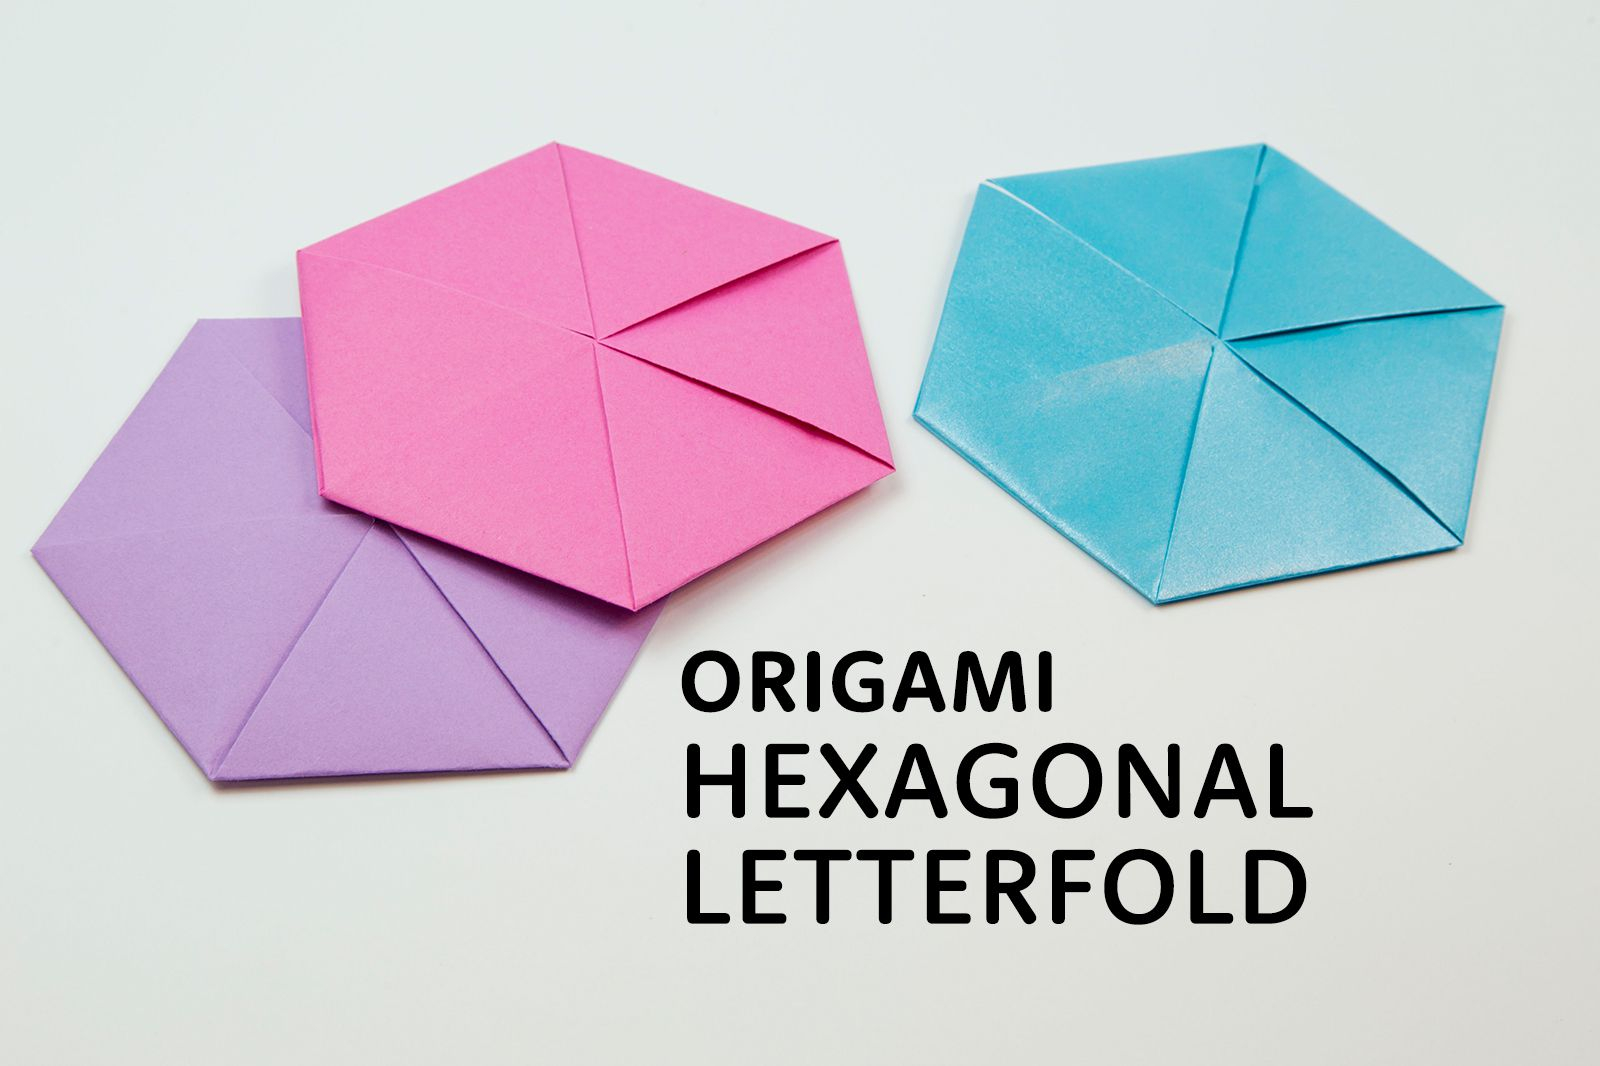 5 Note Origami Make An Origami Hexagonal Letterfold Using A4 Paper